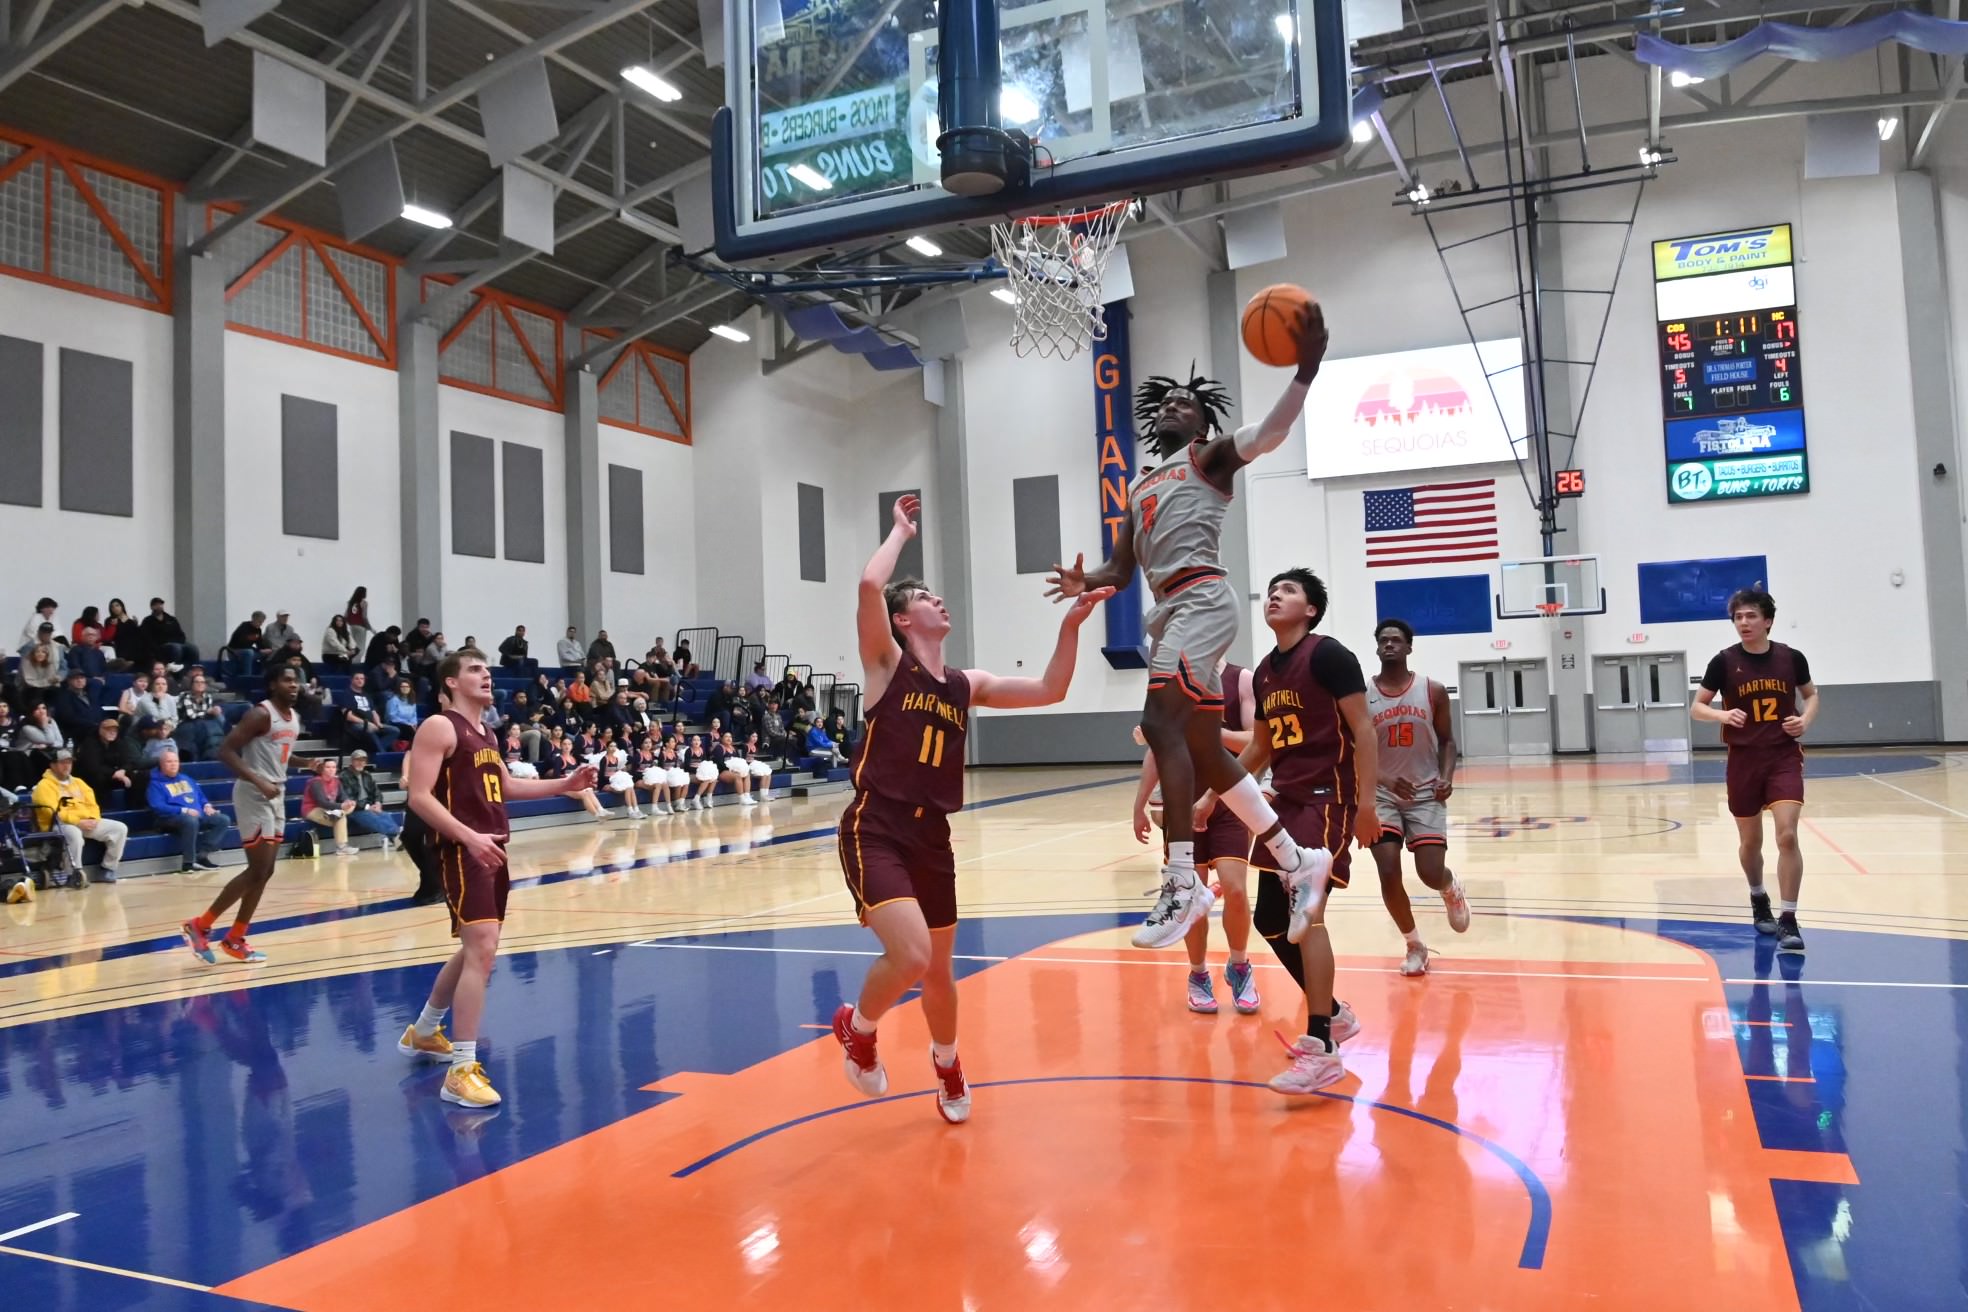 Giants tune up for CVC men's basketball opener with rout of Hartnell